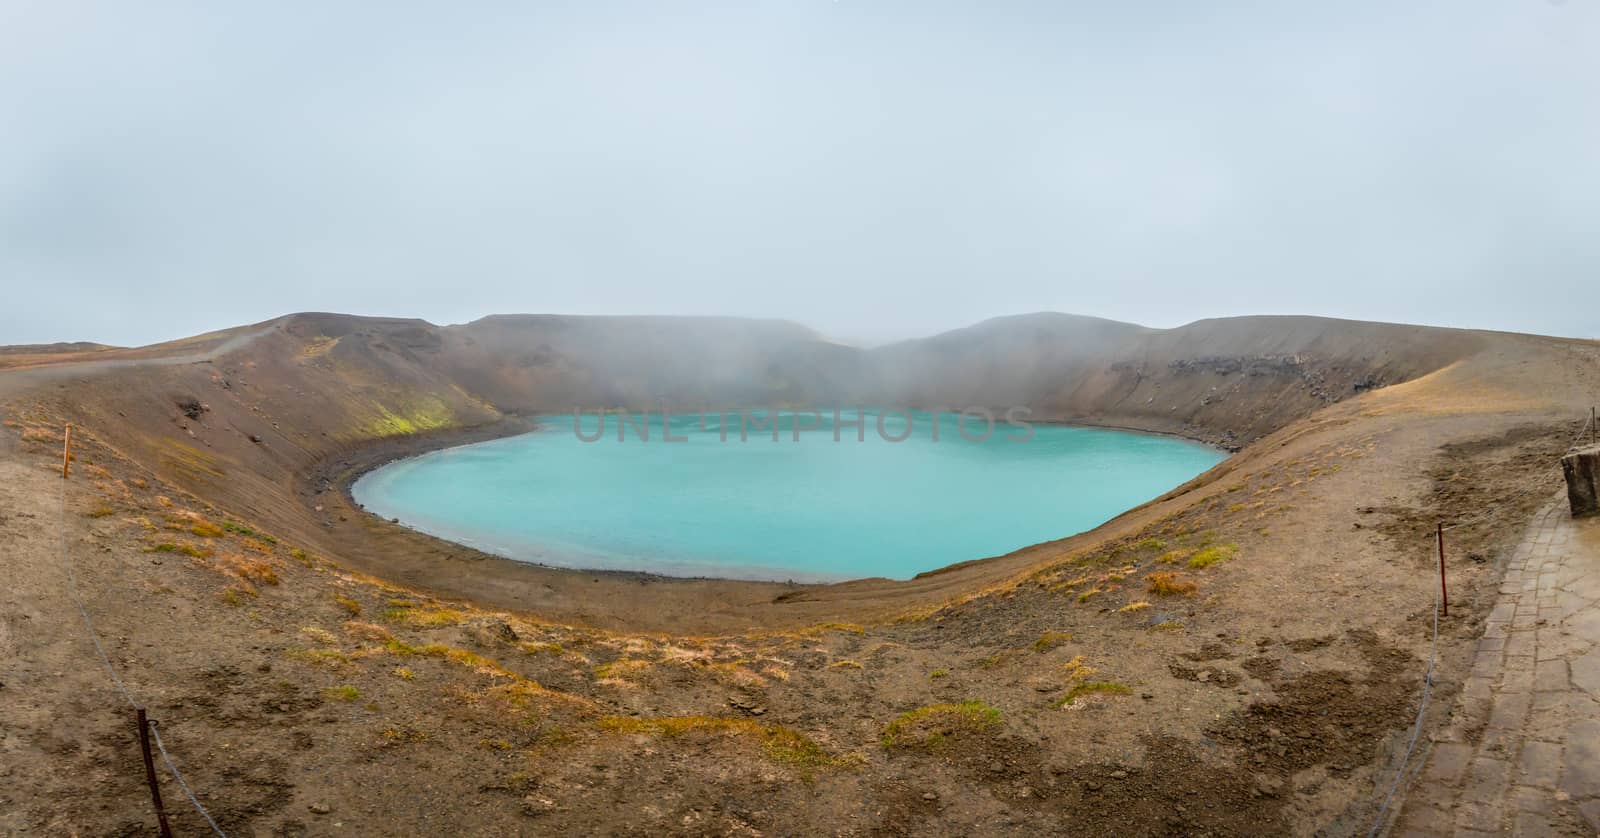 Krafla volcano in Iceland crater lake filled with hot and turquoise water